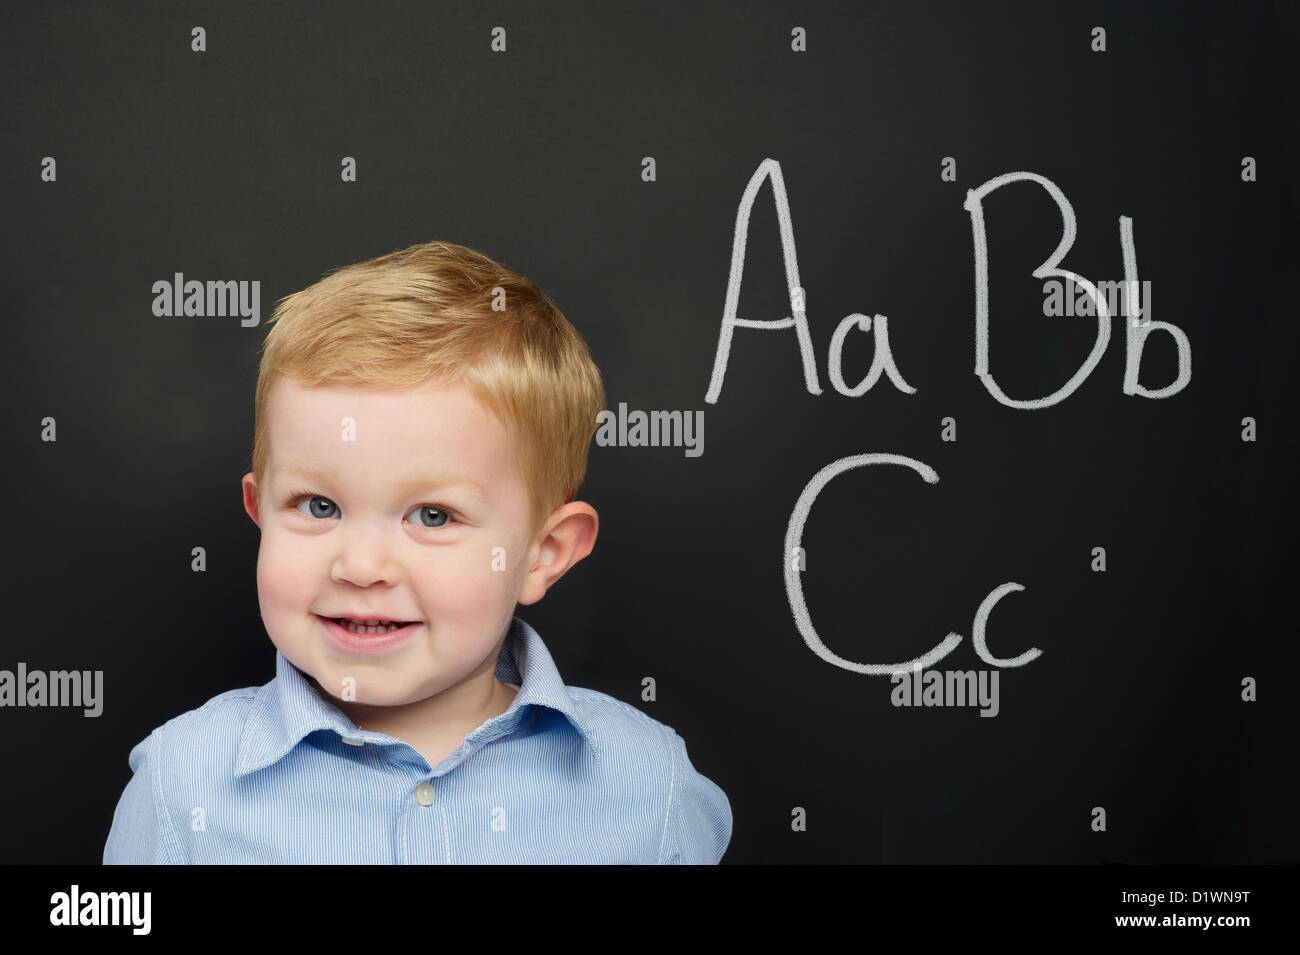 Smart young boy wearing a blue striped shirt standing in front of a blackboard Stock Photo